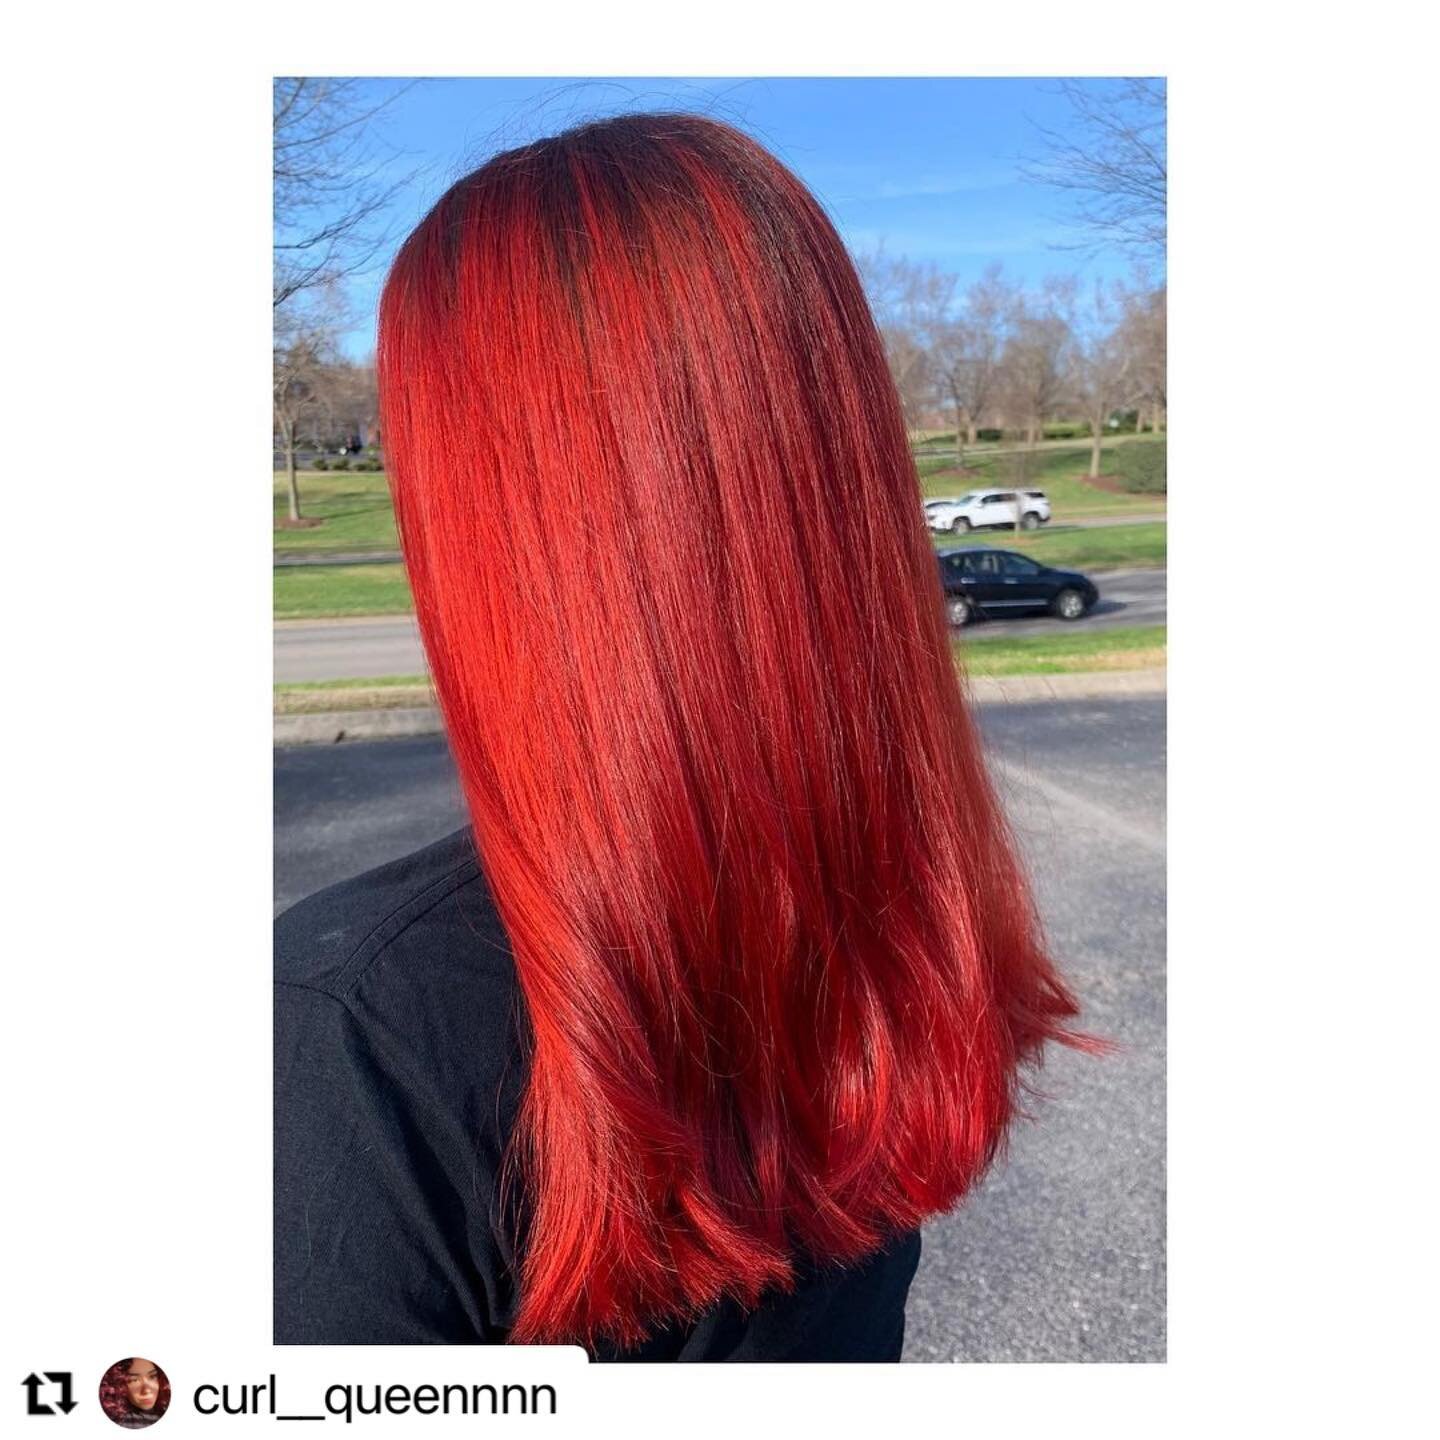 #Repost @curl__queennnn with @make_repost
・・・
Look at this beautiful red ! 🍒🍓❤️